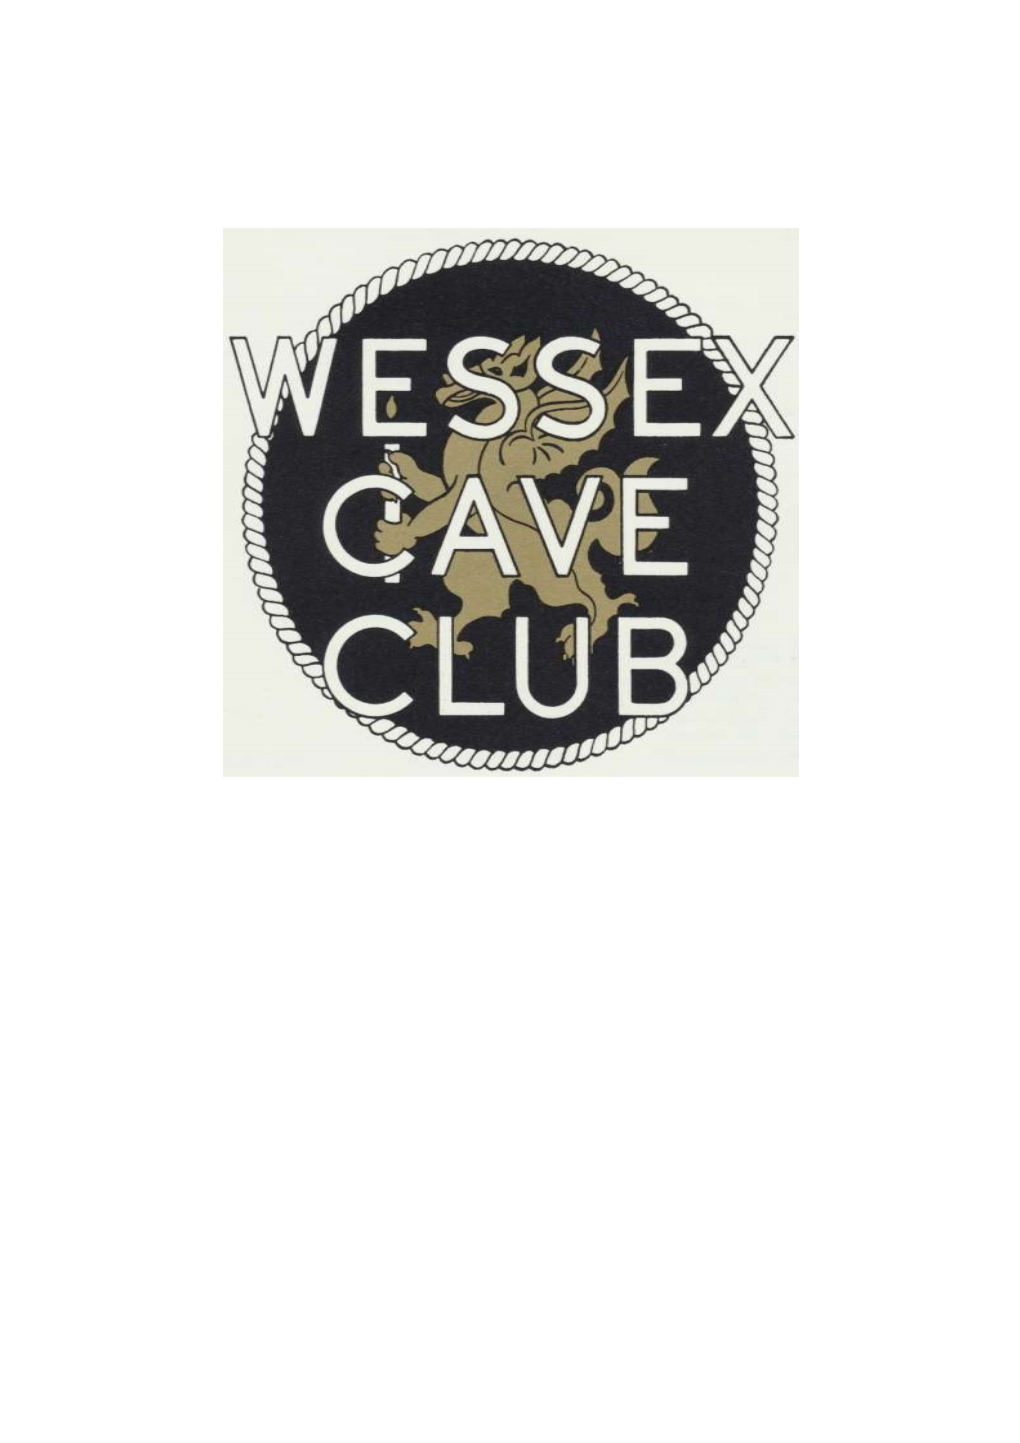 The Wessex Cave Club Journal Volume 21 (Number 228) May 1991